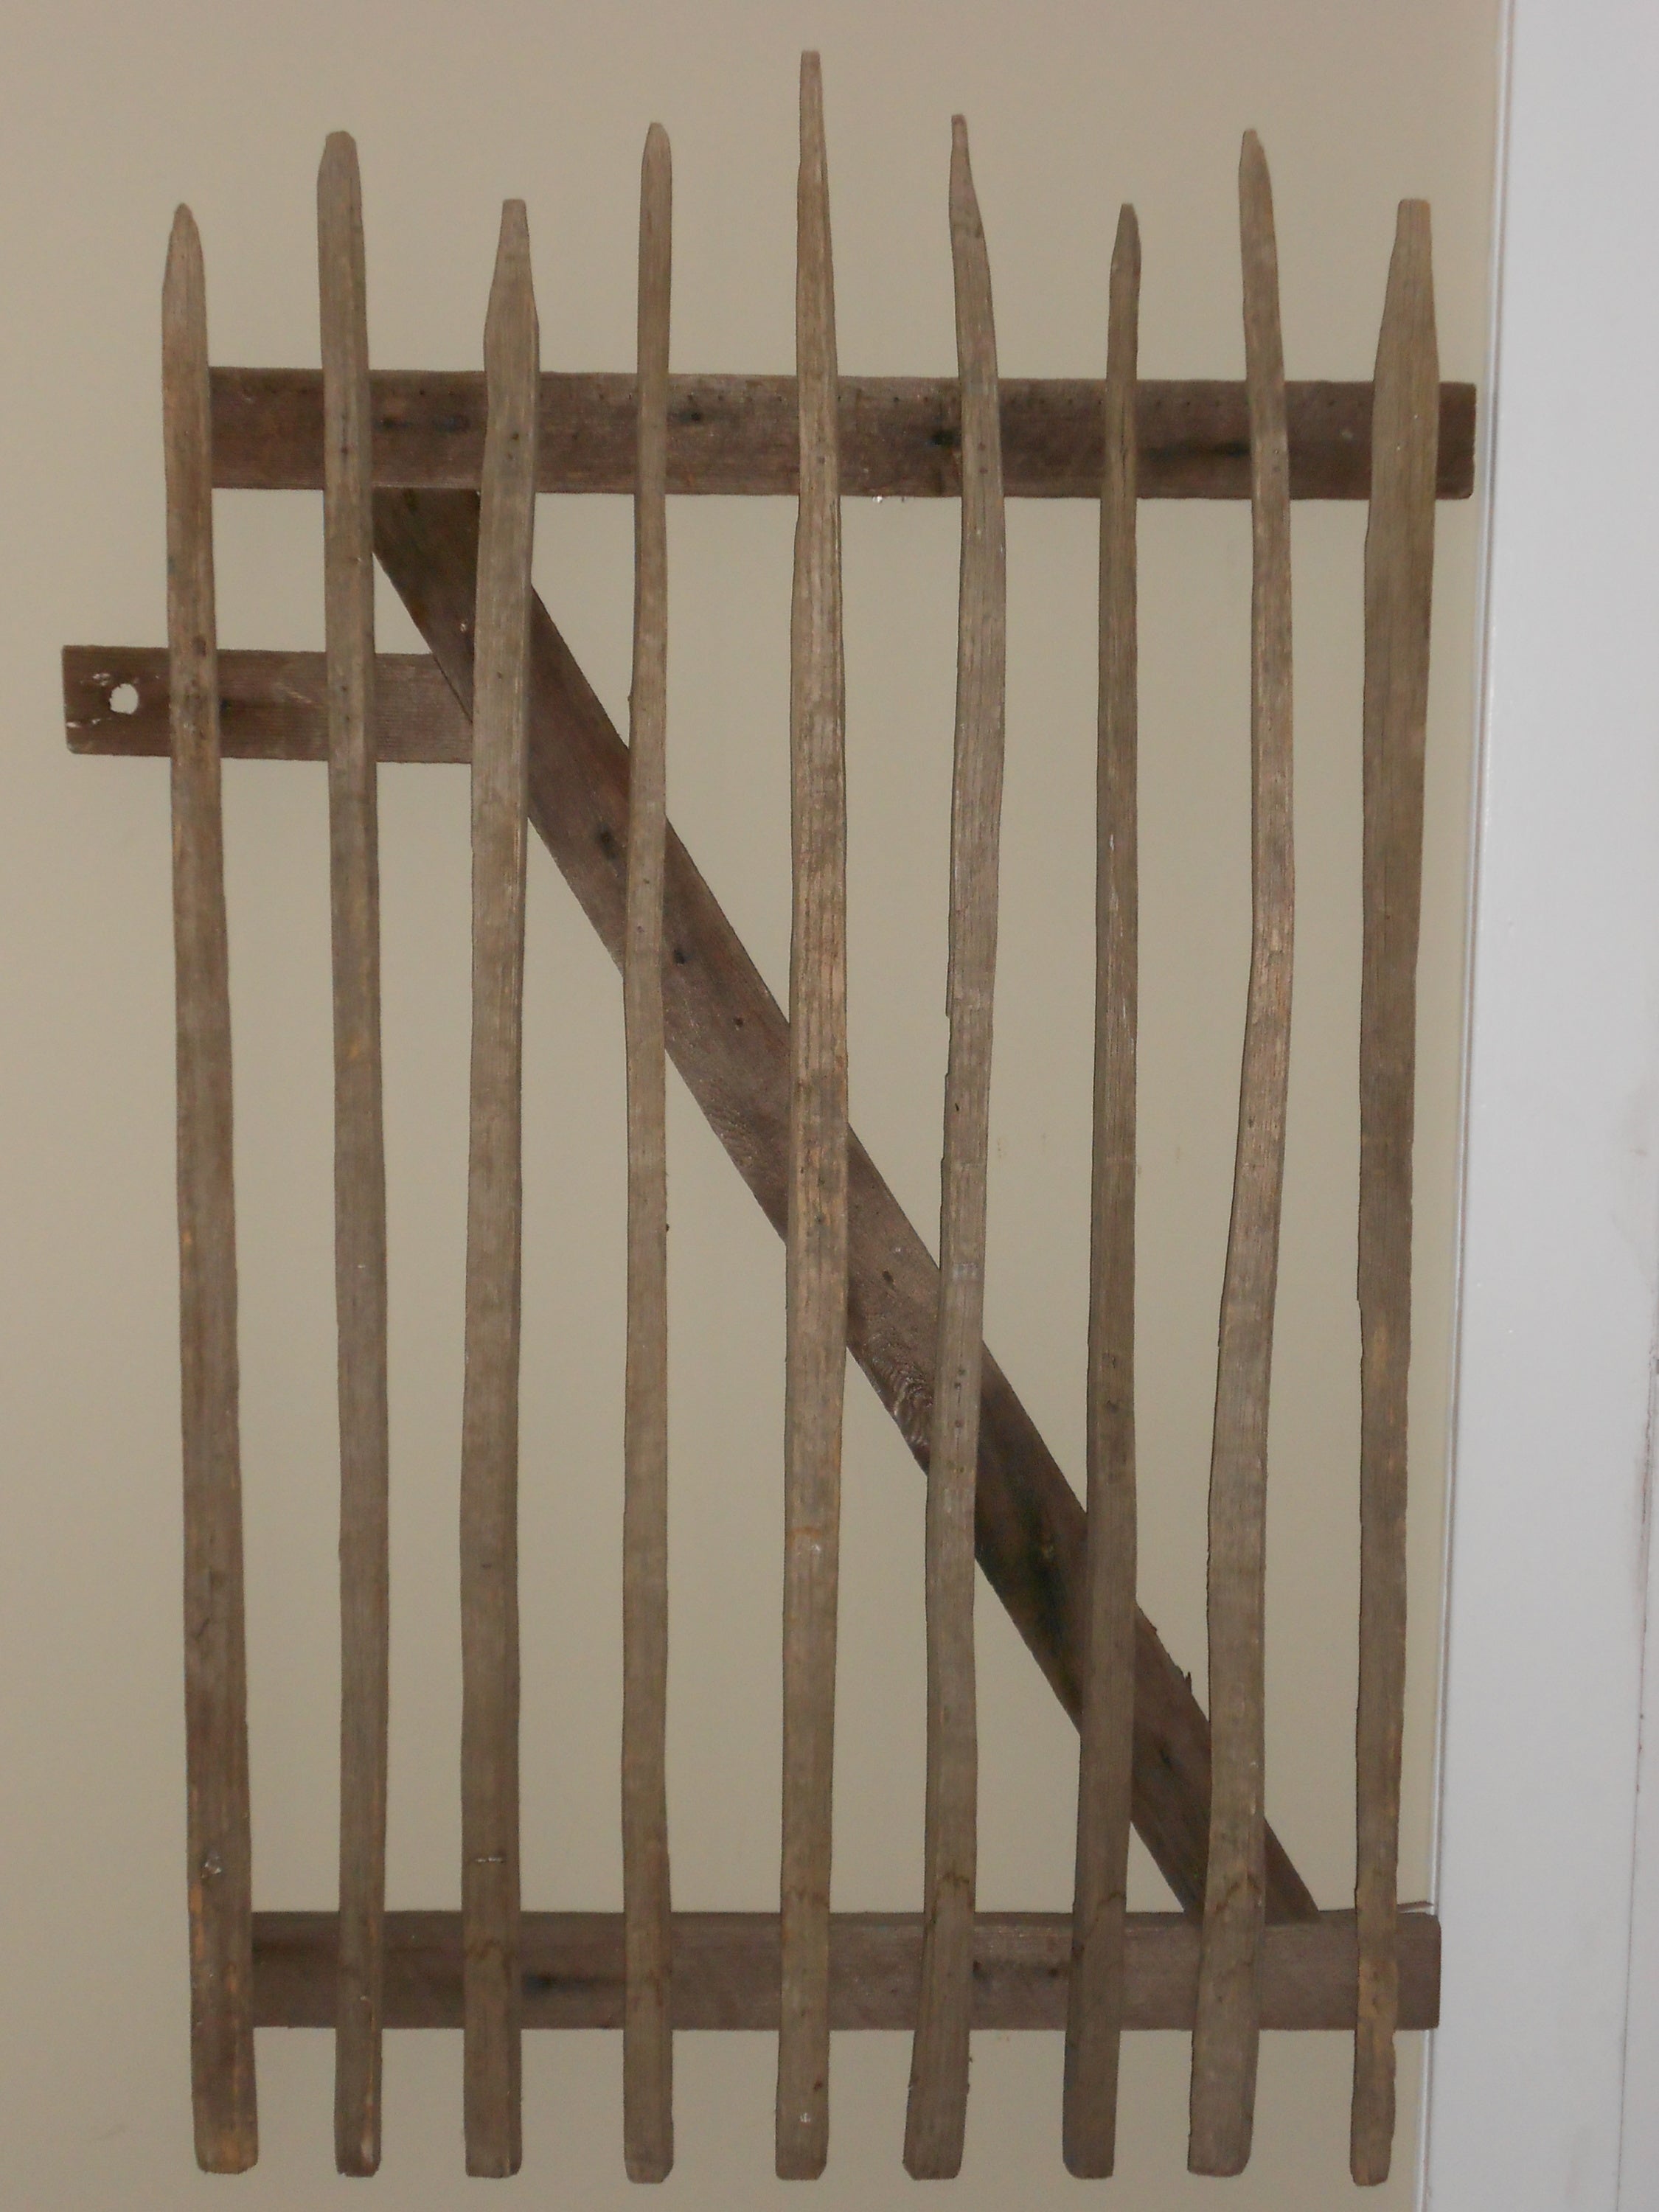 Primitive Garden Gate of hand-hewn stakes